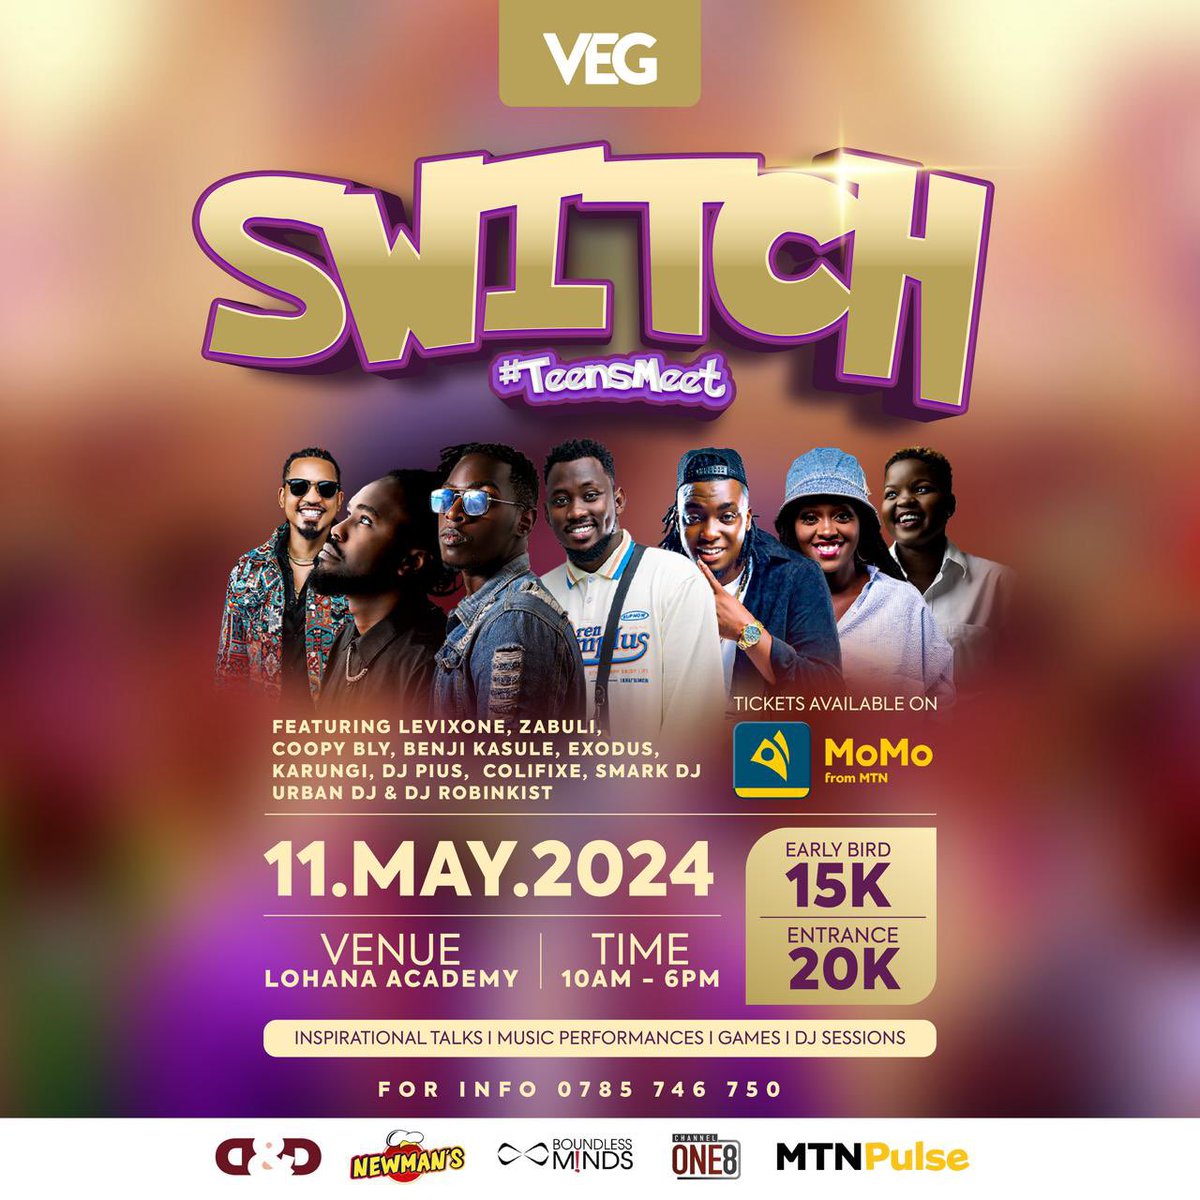 Hey teens & holidaymakers!📣
This Saturday, #Switch2024 brings an electrifying mix of fun, interaction, learning, and endless enjoyment! Don't miss out! Get your early bird ticket for just 15k on the #MTNMoMo App. #TeensMeet